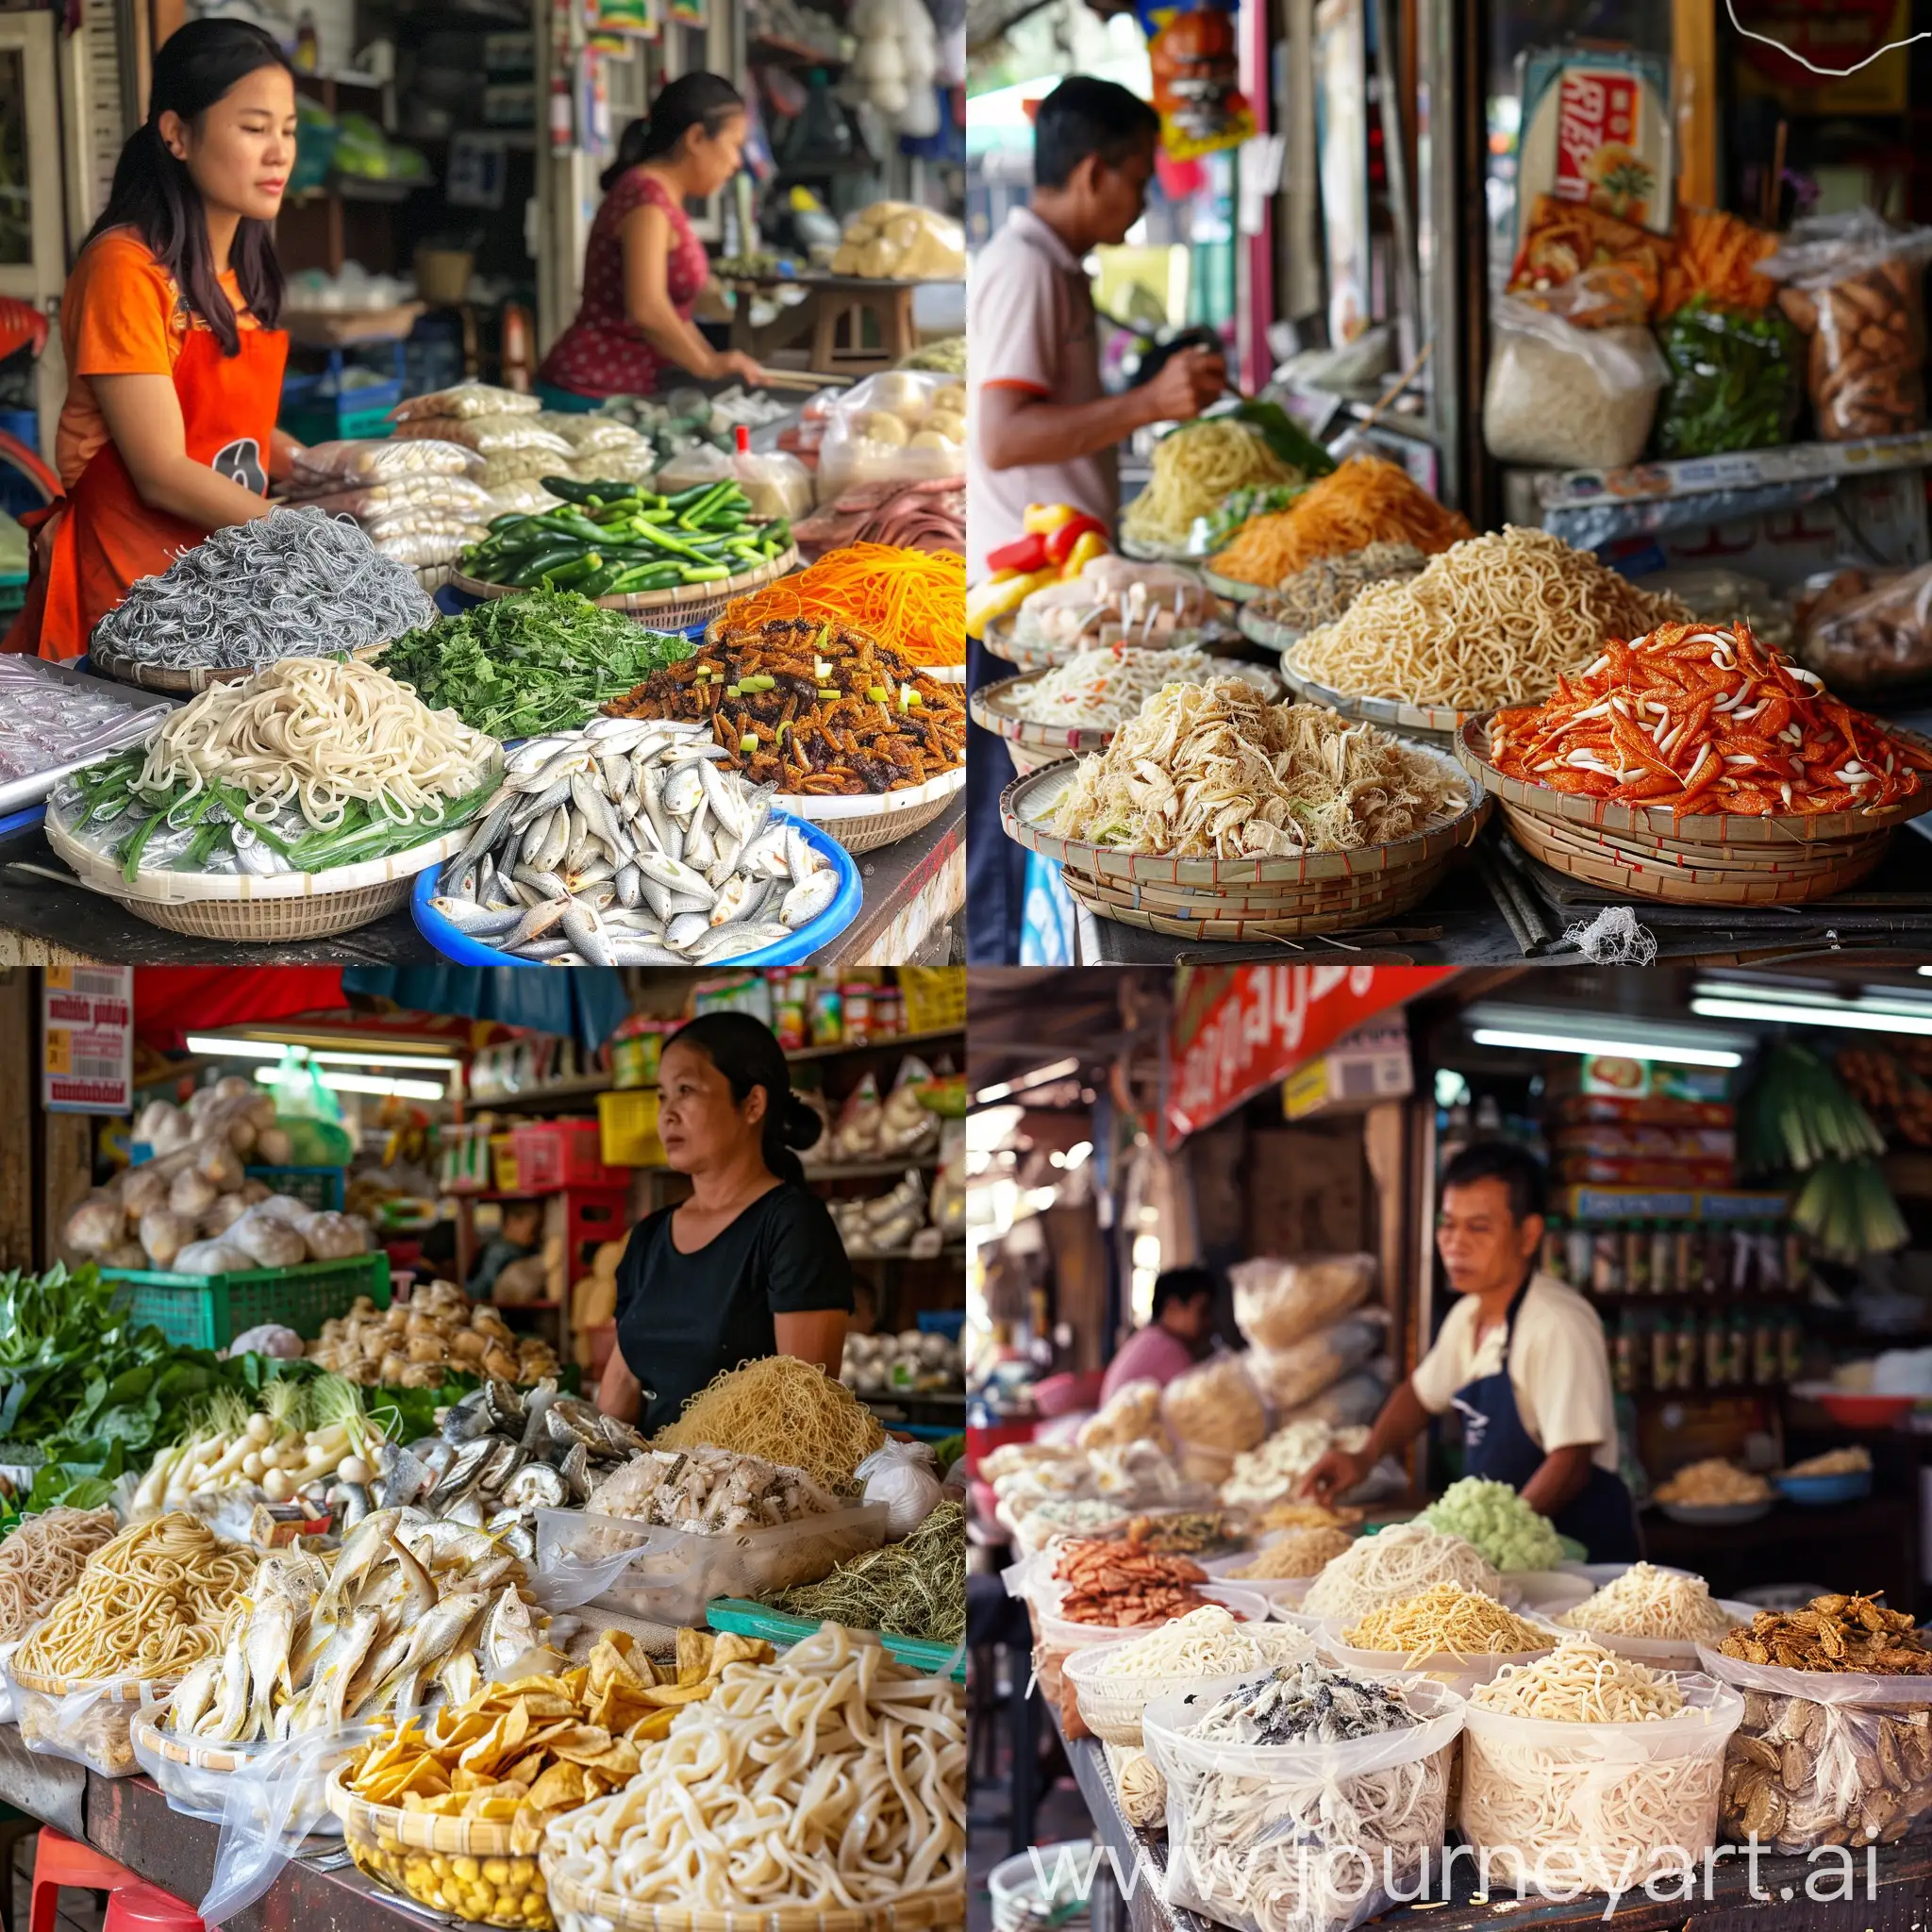 Traditional-Market-Stall-with-Noodles-Dried-Fish-and-Vegetables